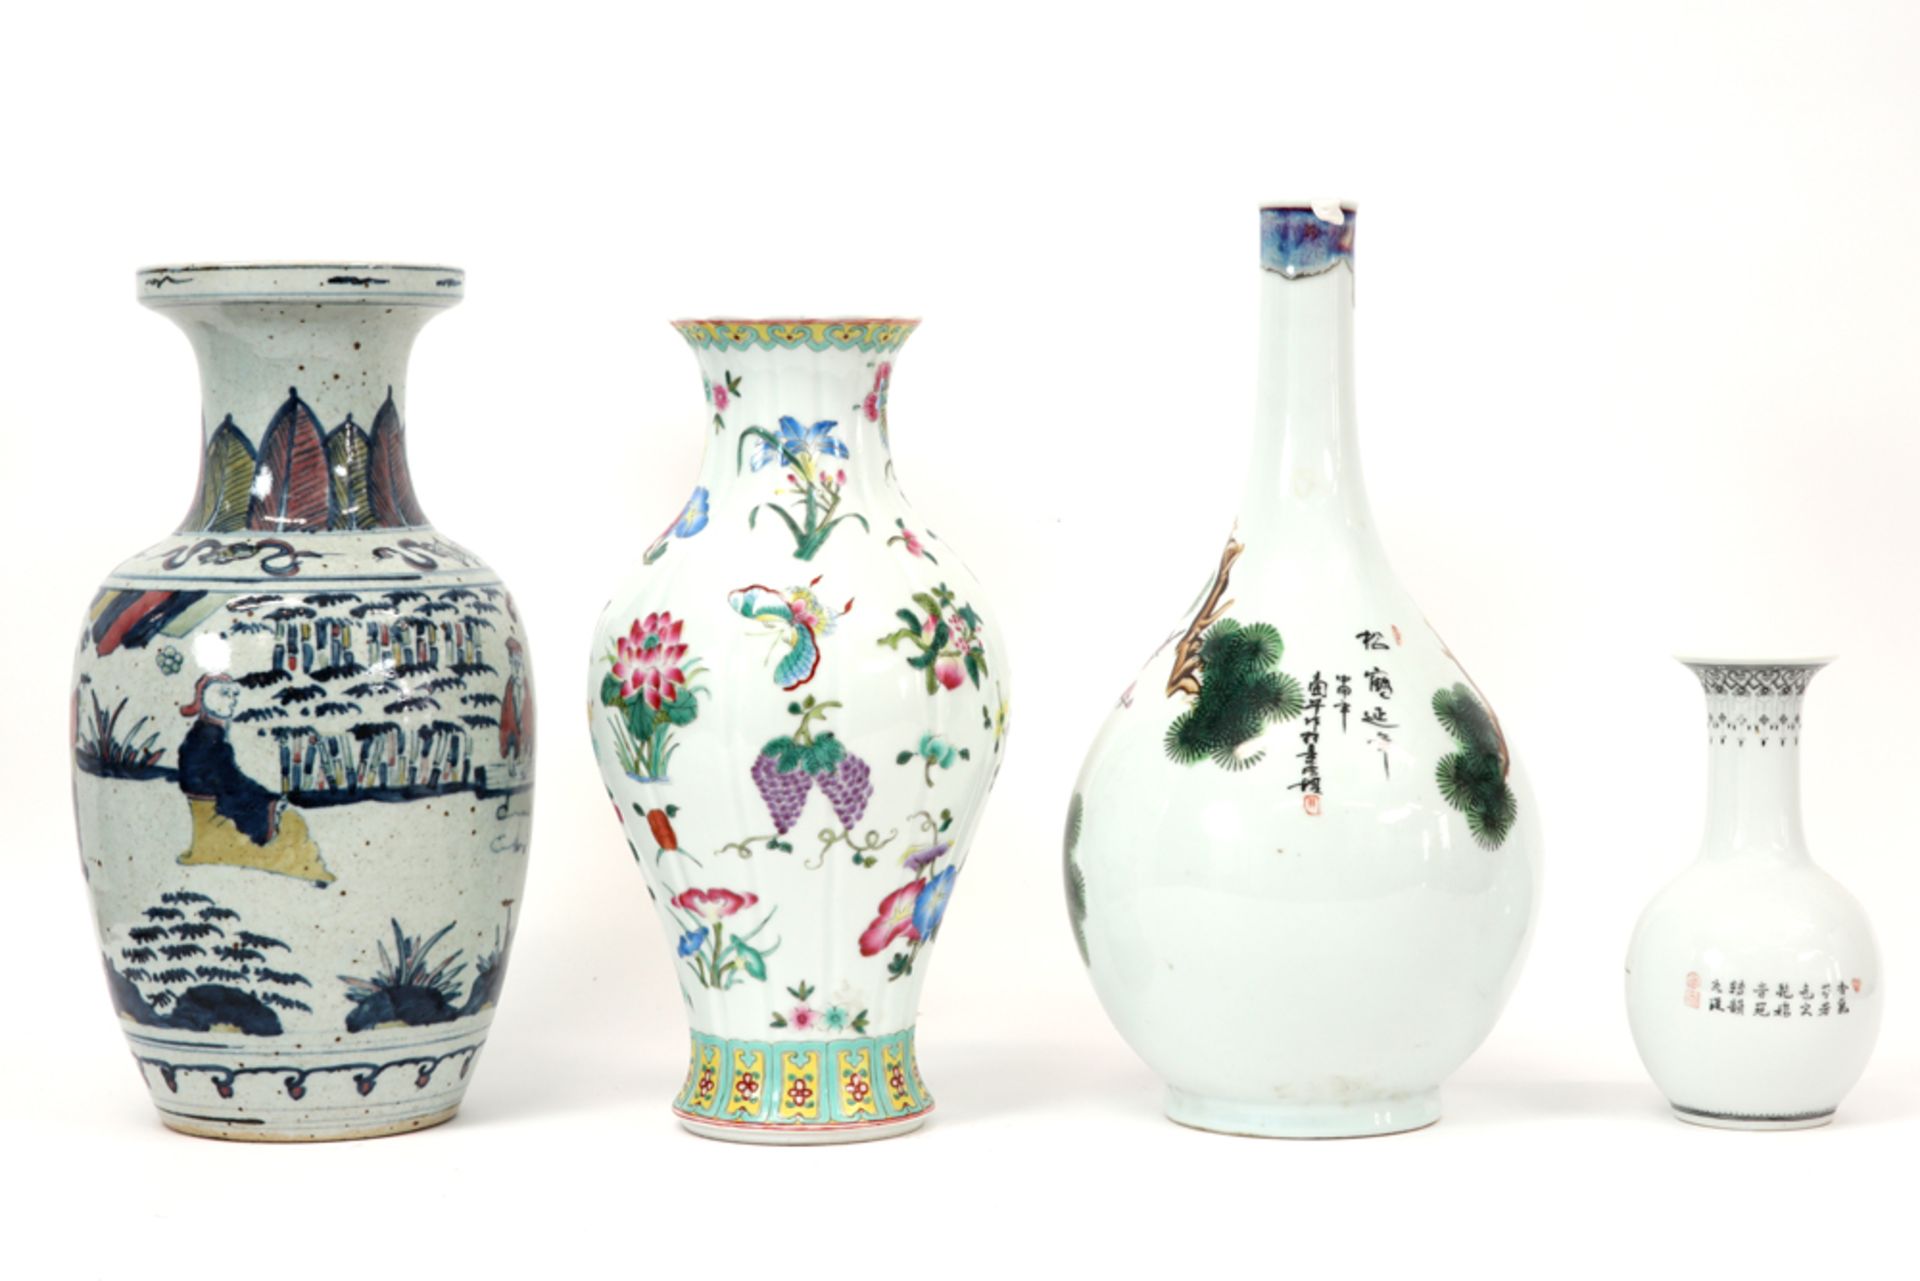 four Chinese vases in porcelain ||Lot van vier Chinese vazen in porselein met polychroom decor - - Image 2 of 6